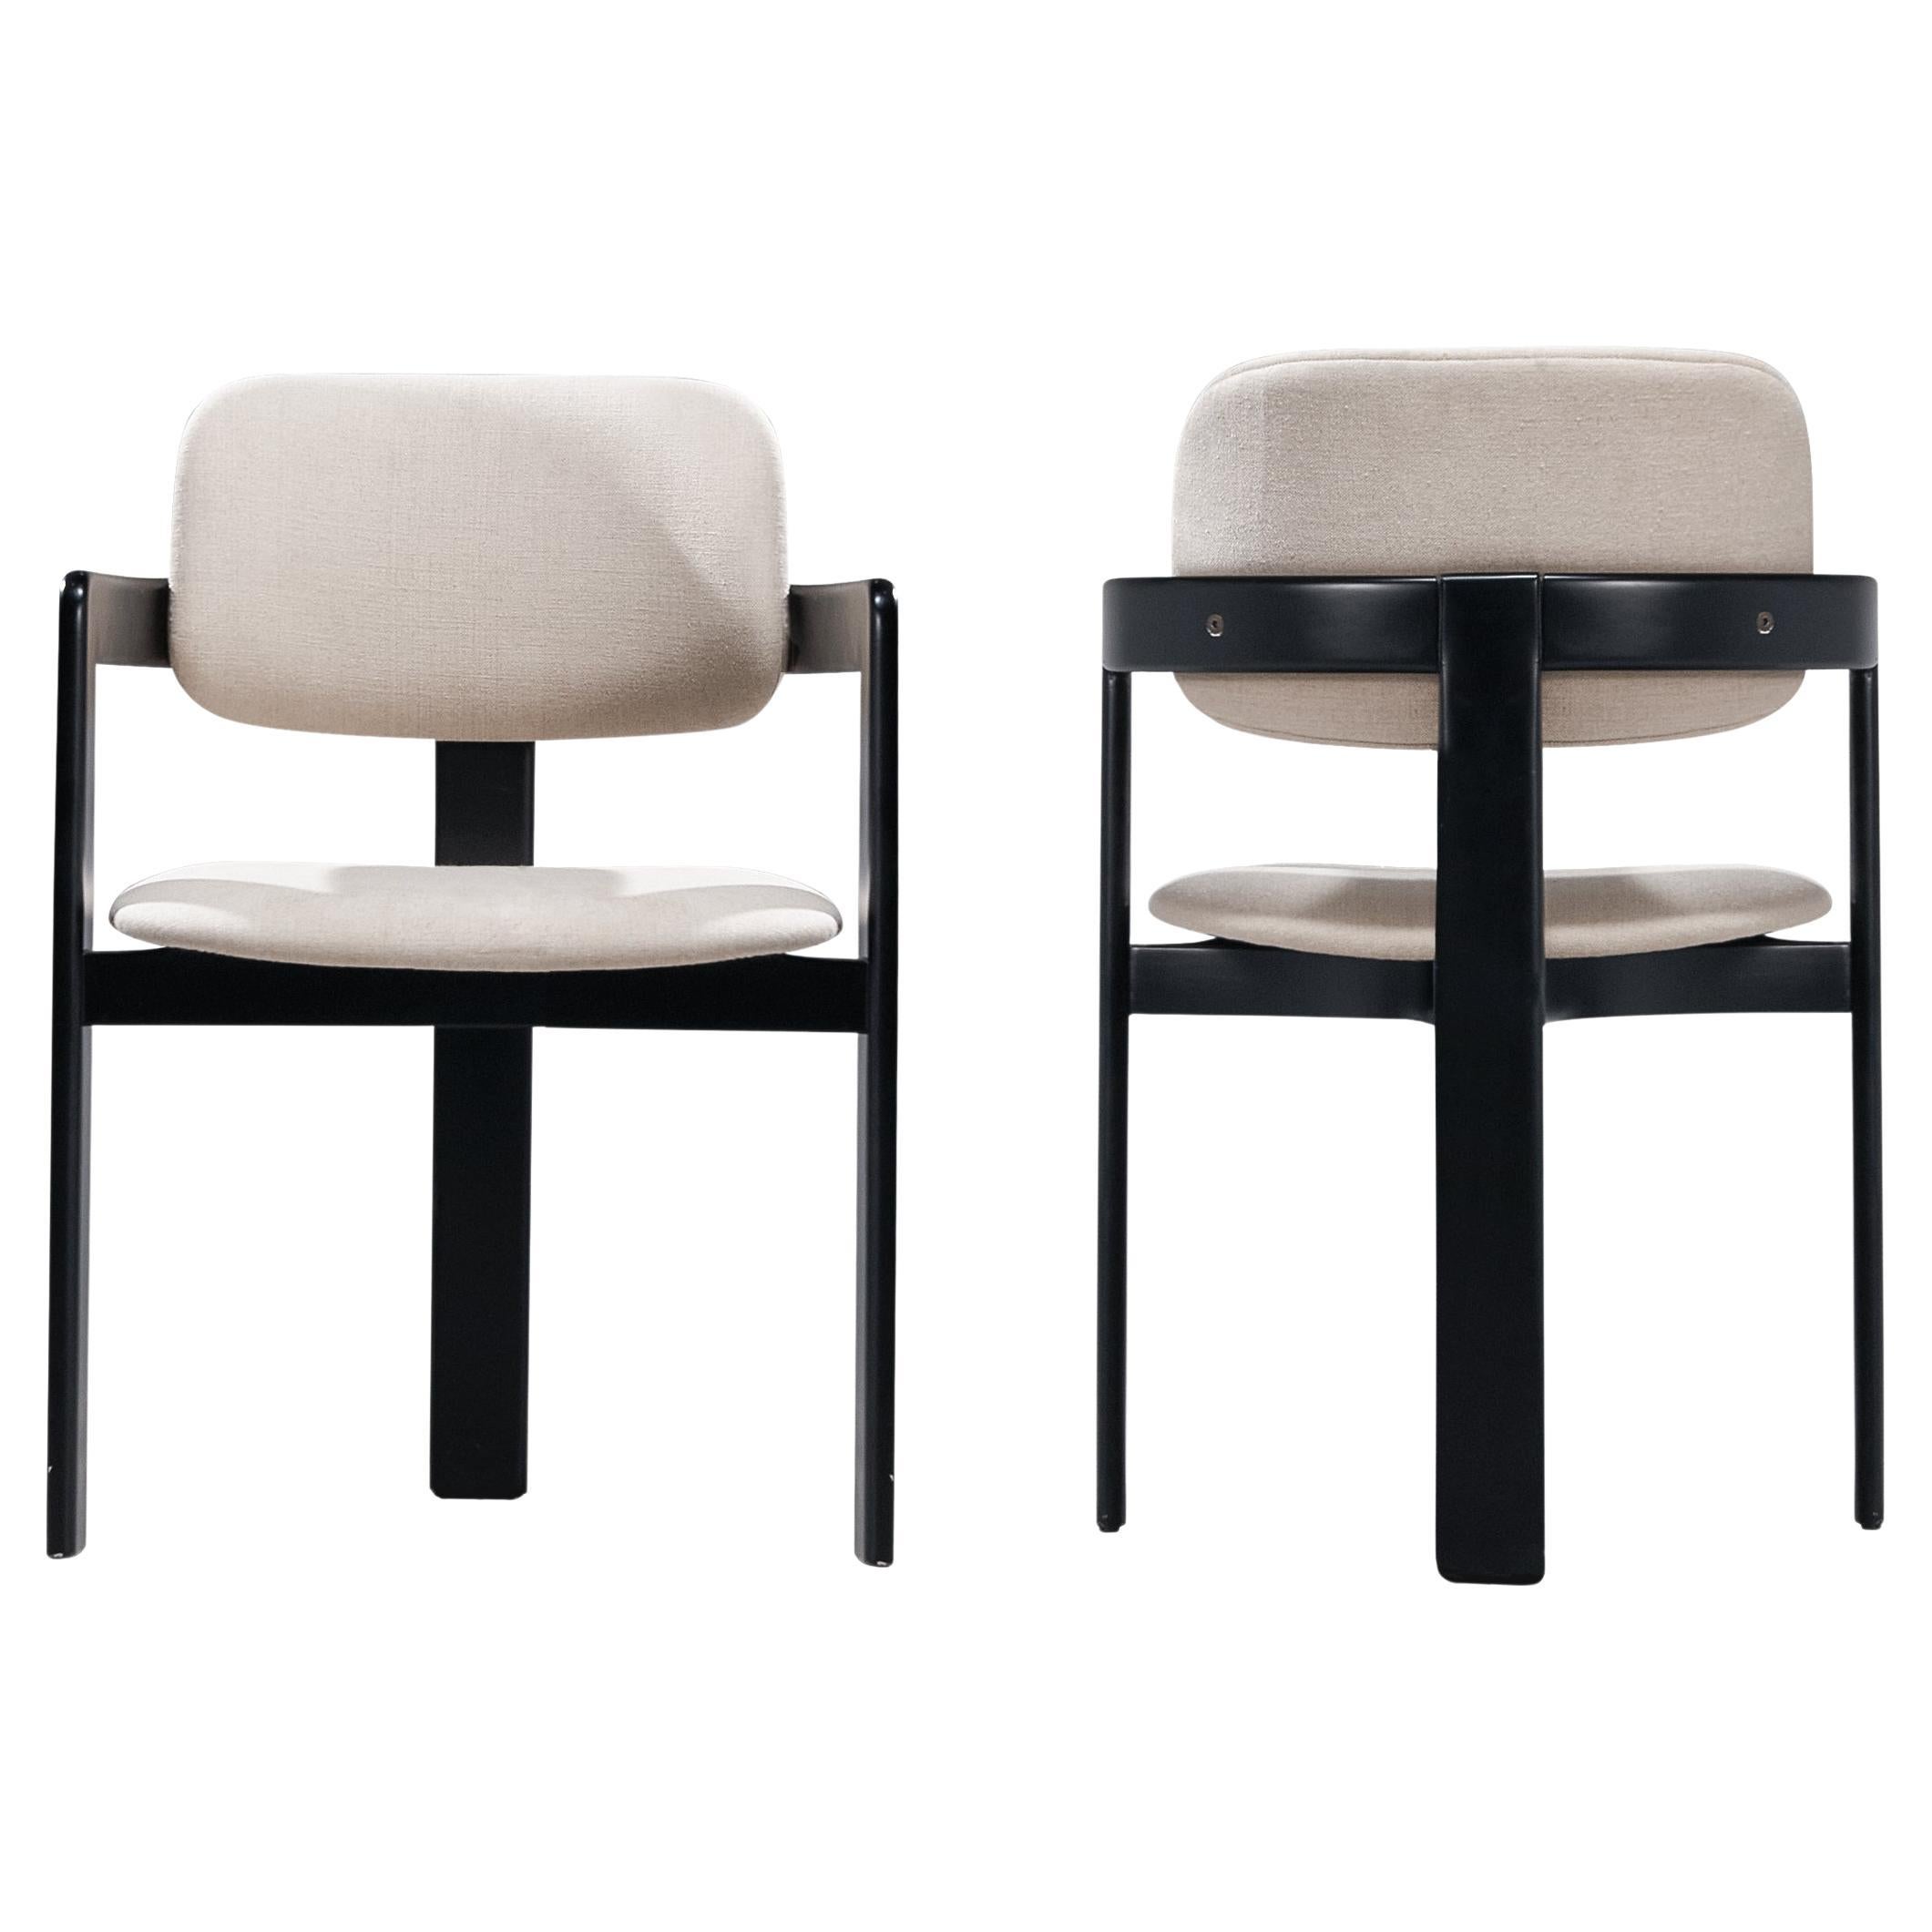 Italian Pair of Dining Chairs in Off-White Upholstery and Black Frame